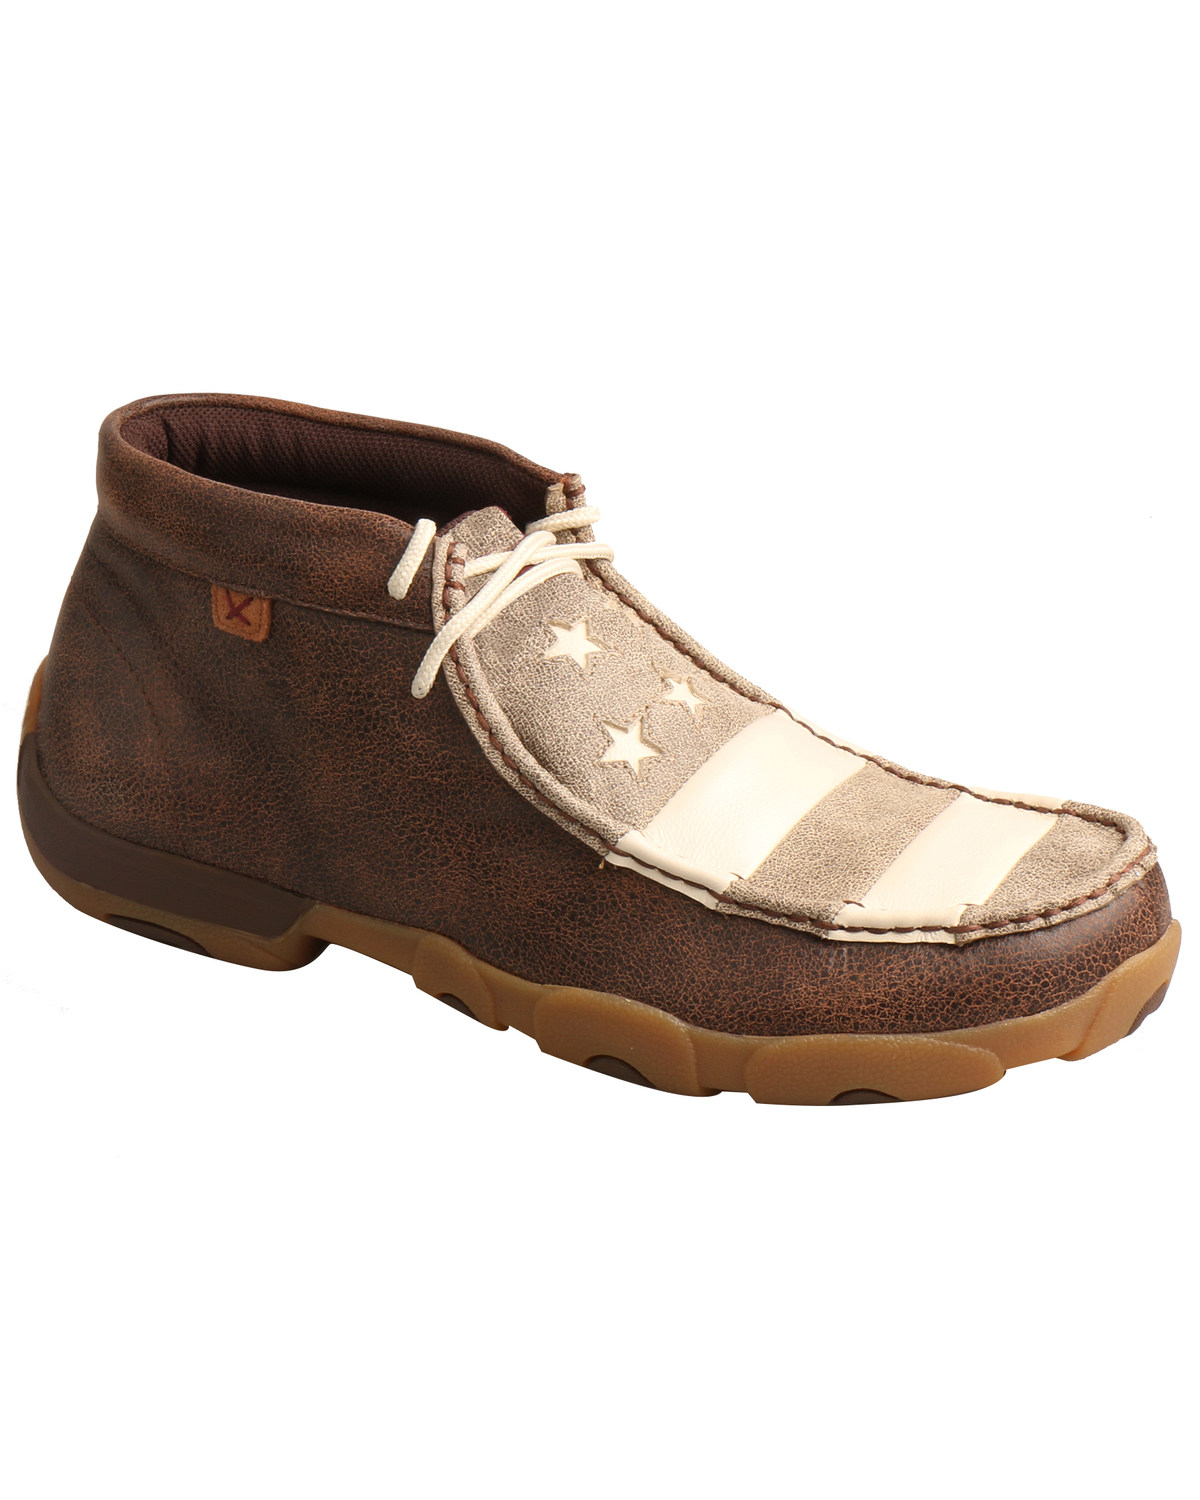 Twisted X Men's Patriotic Driving Moccasin Shoes - Moc Toe